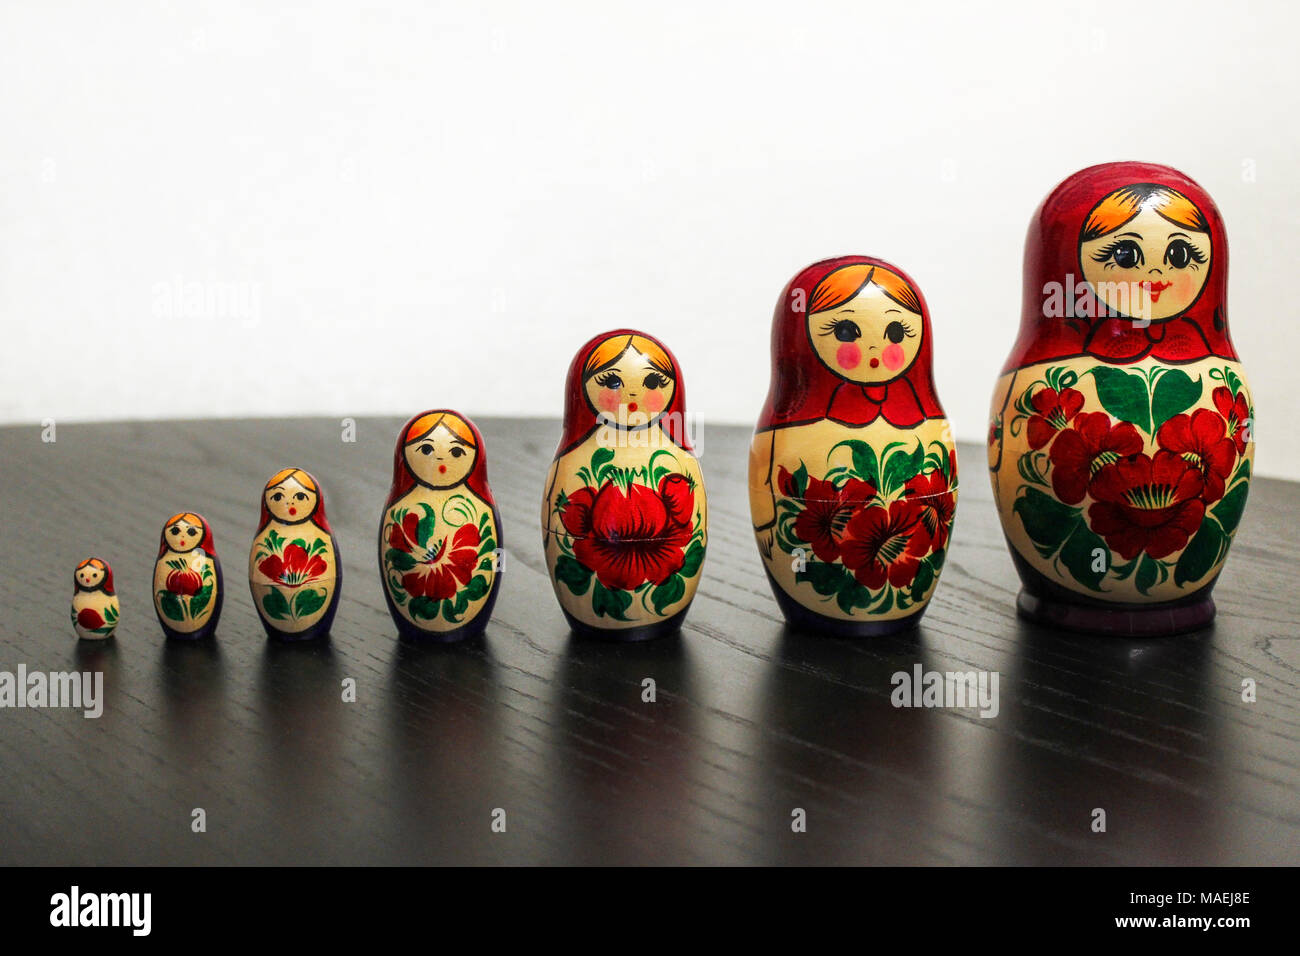 Russian nesting dolls in a row on a black wooden table Stock Photo